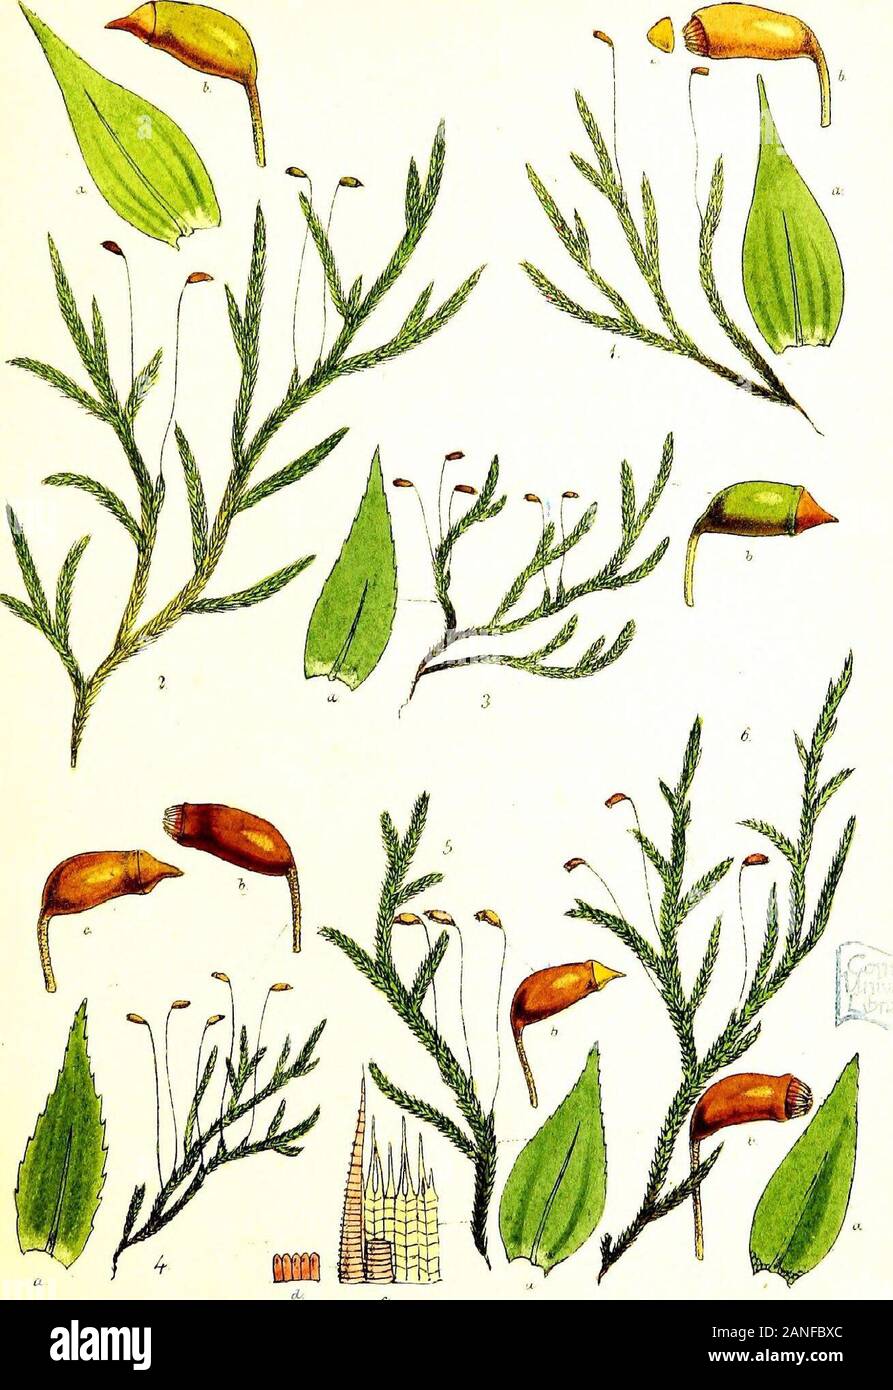 Handbook of British mosses; comprising all that are known to be natives of the British Isles . m-tzr* Vincent 3rookEj PLATE V. 1. Hypnum albicans. a. leaf, magnified. b. sporangium, magnified. c. lid, magnified. 2. H. Iute3cens. a. leaf, magnified. b. sporangium, magnified.8. H. plumosum. a. leaf, magnified. b. sporangium, magnified. 4. H. velutinum. a. leaf, magnified. b. sporangium, with peristome, magnified. c. sporangium, with lid, magnified. 5. H. rutabulum. a. leaf, magnified. b. sporangium, magnified. c. part of peristome, magnified. d. ring, magnified. 6. H. rivulare. a. leaf, magnifie Stock Photo